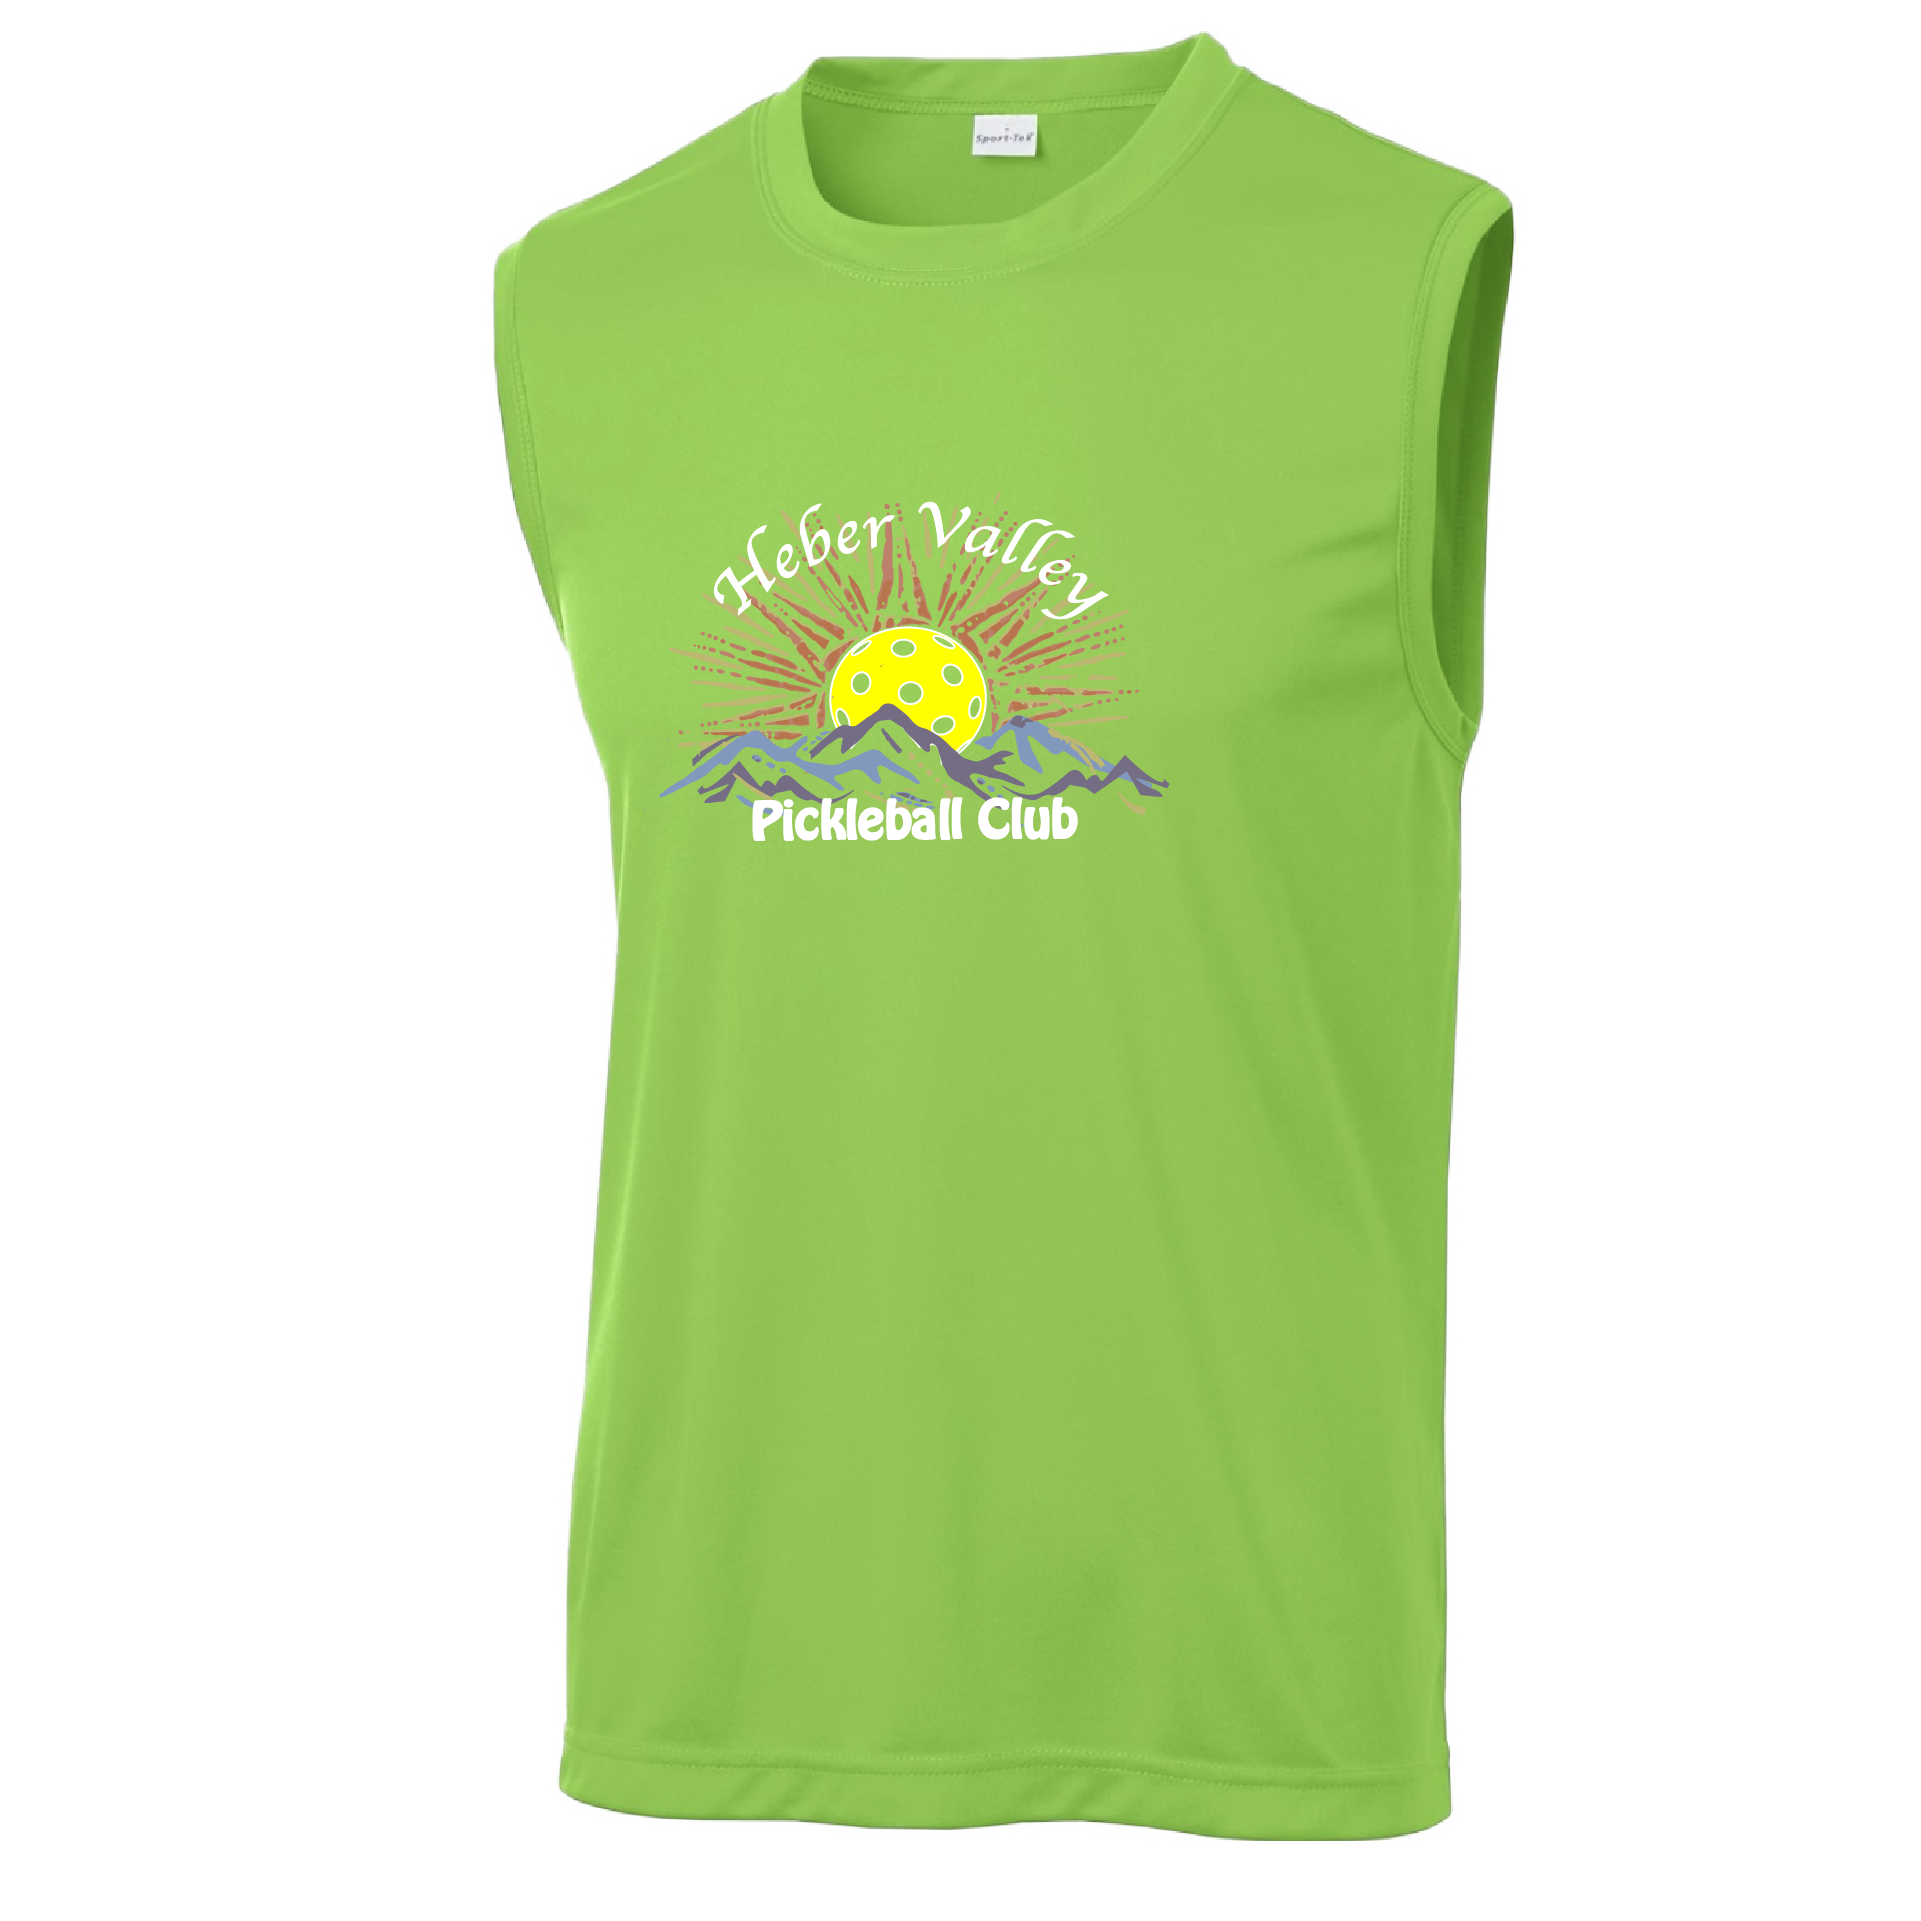 Pickleball Shirt Design: Heber Valley Pickleball Club  Men's Style: Sleeveless  Turn up the volume in this Men's shirt with its perfect mix of softness and attitude. Material is ultra-comfortable with moisture wicking properties and tri-blend softness. PosiCharge technology locks in color. Highly breathable and lightweight.